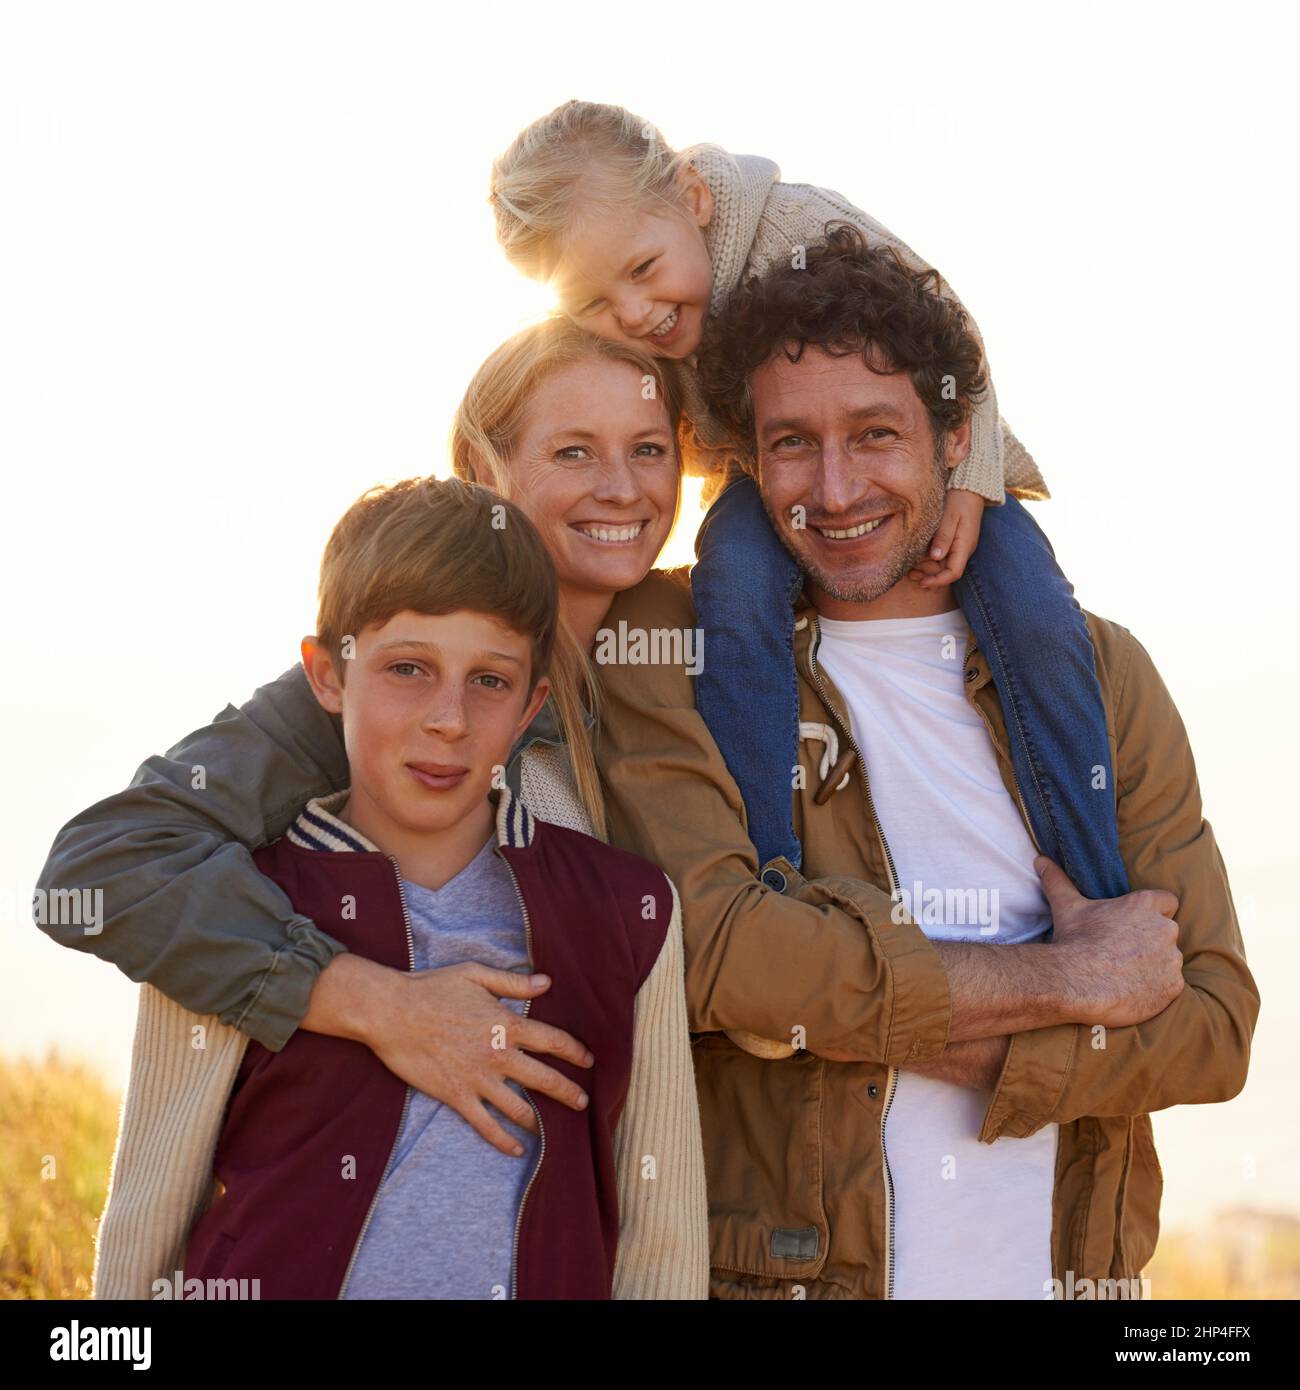 Keep your loved ones close. Portrait of a happy family out on a morning walk together. Stock Photo